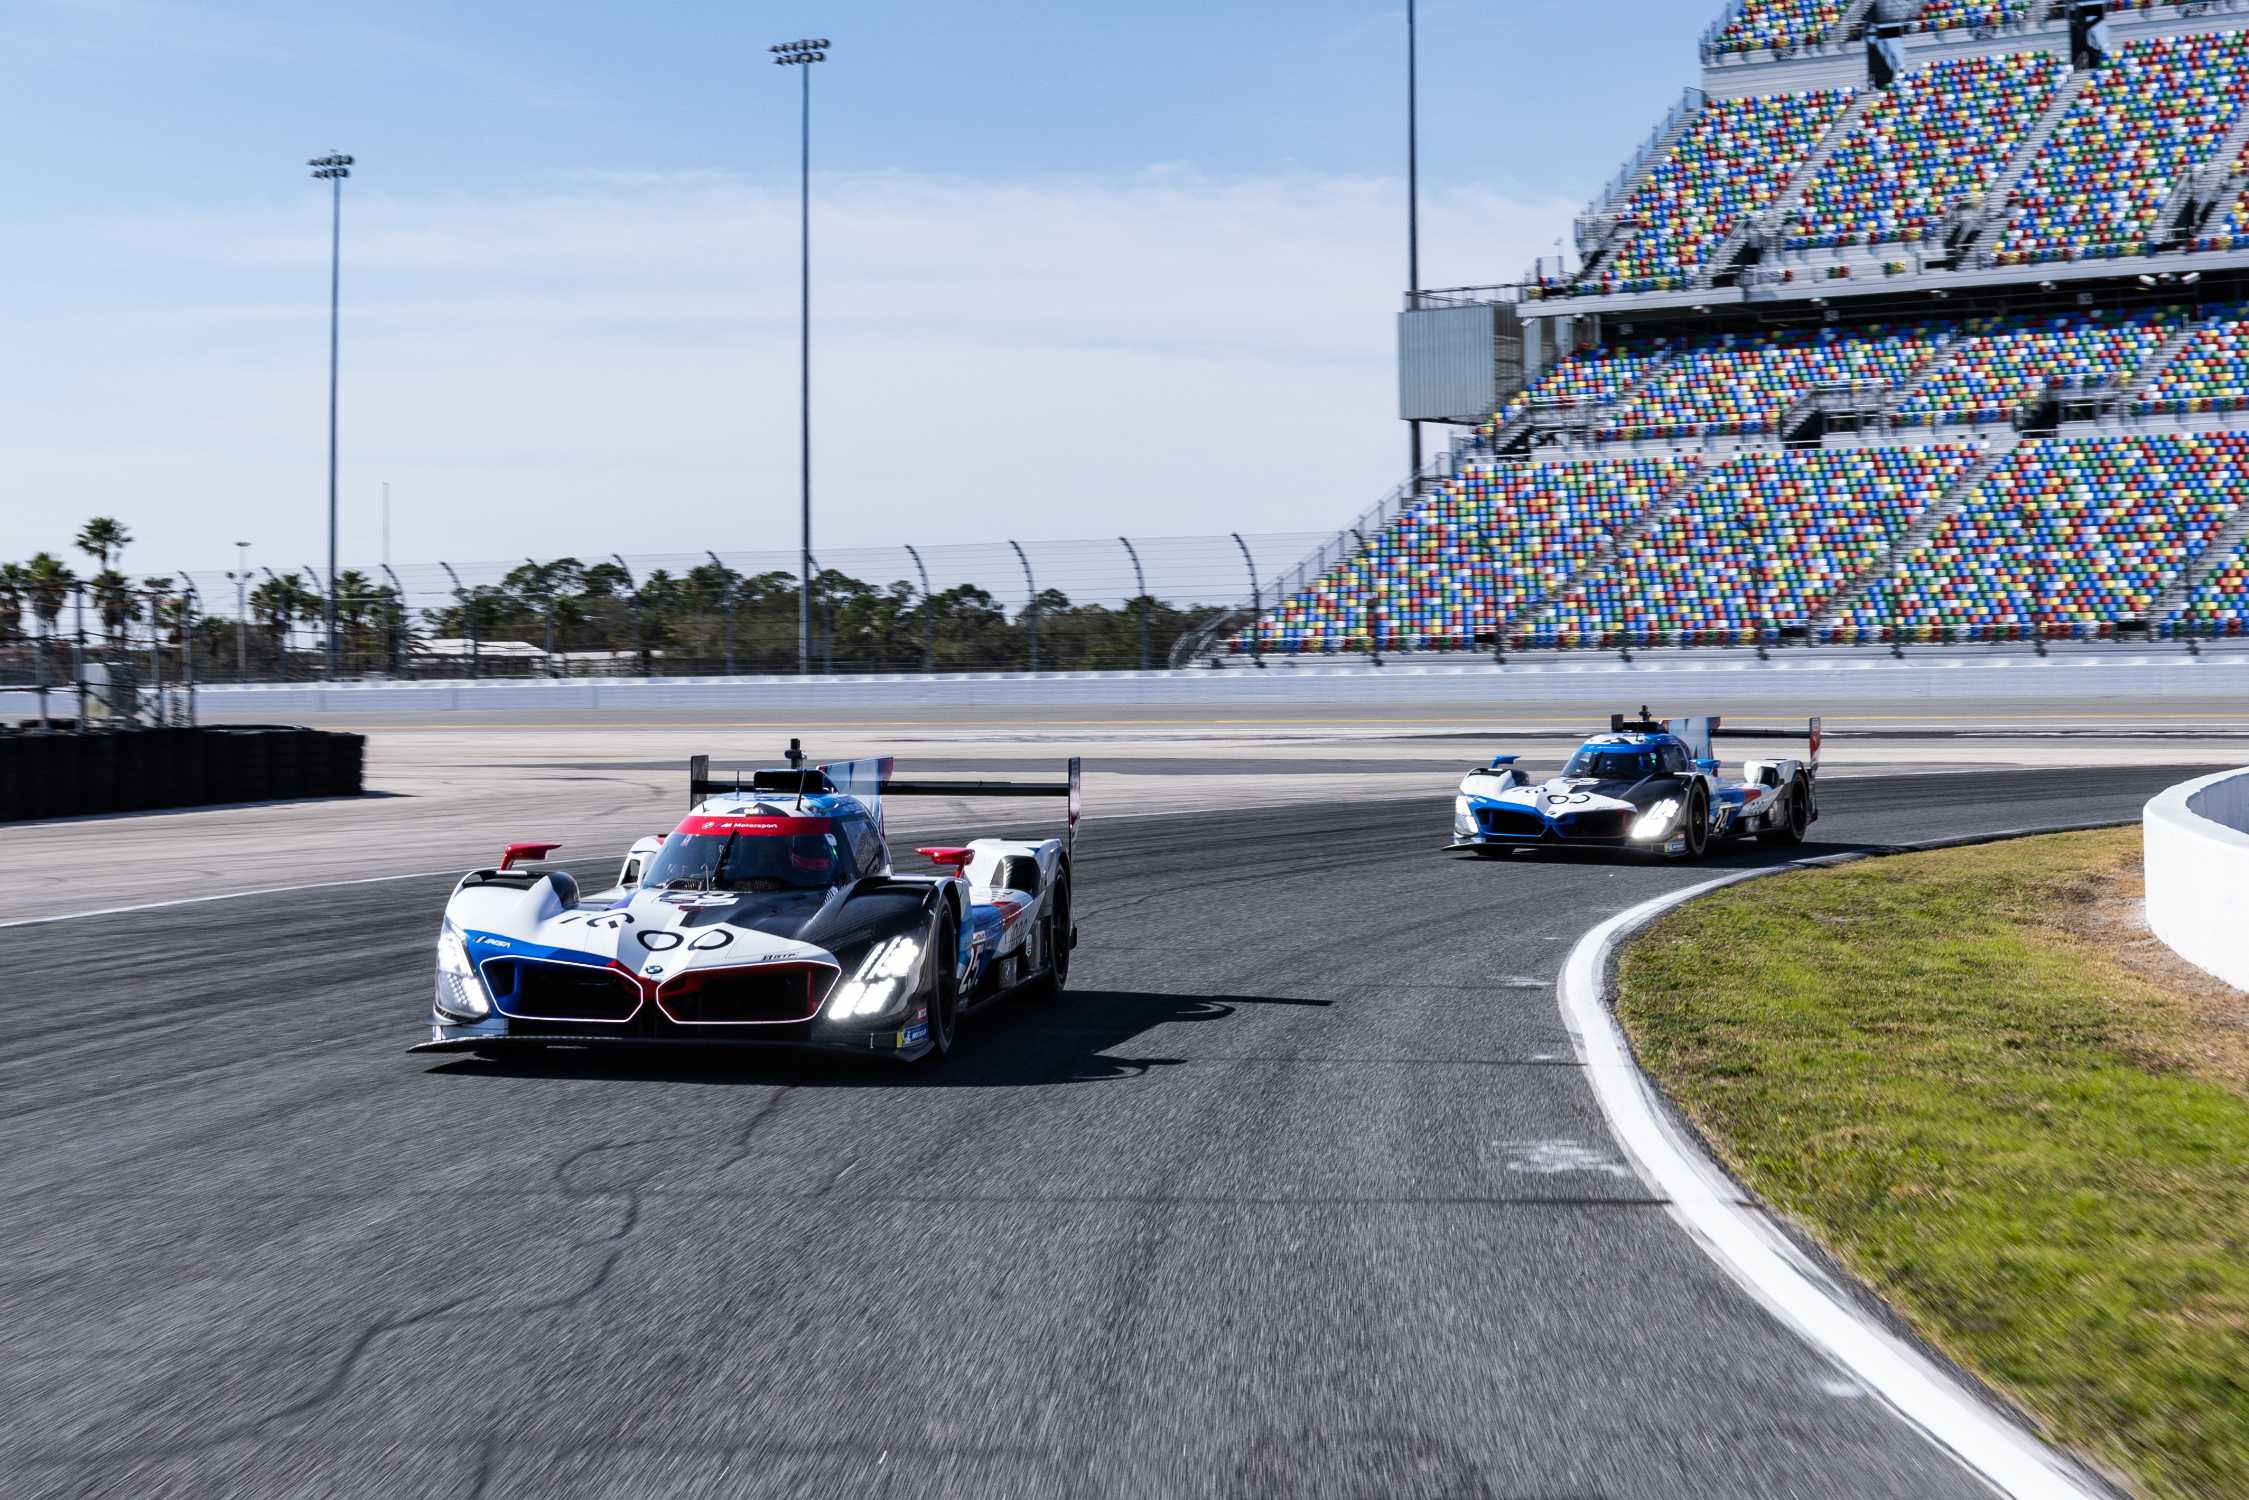 24h Daytona Preview and media guide ahead of the debut of the BMW M